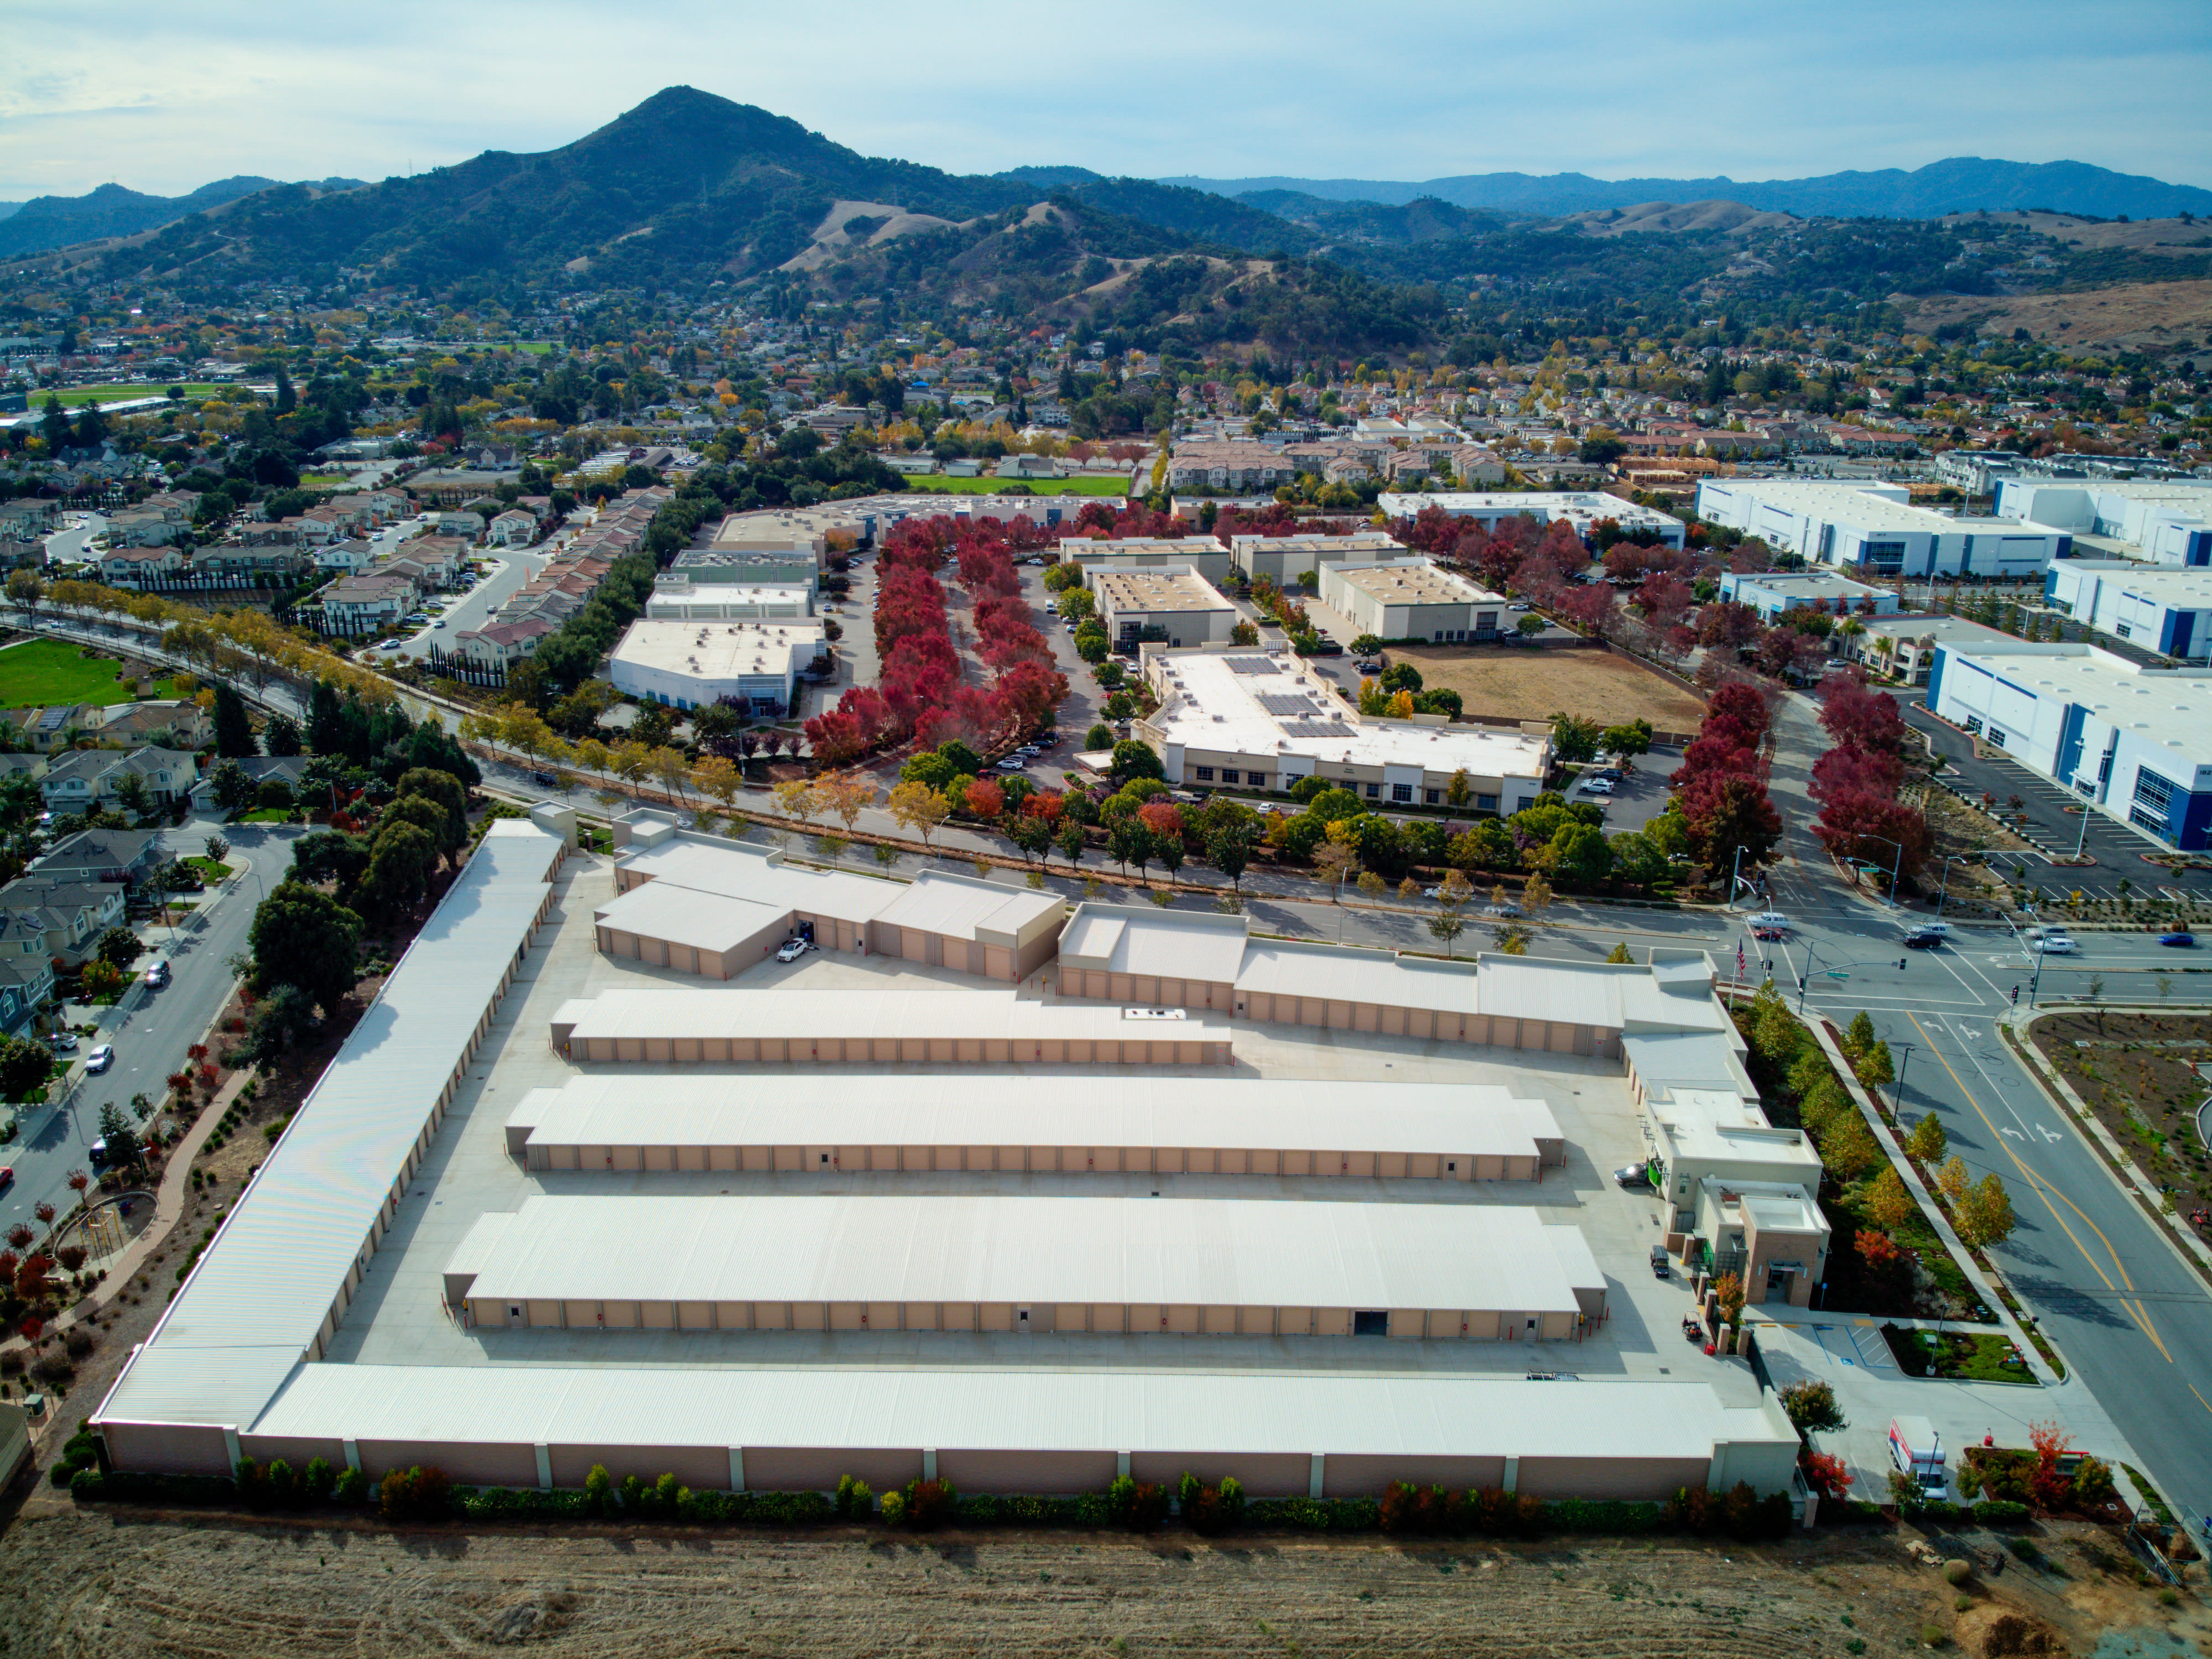 Contact Butterfield Self Storage in Morgan Hill, California